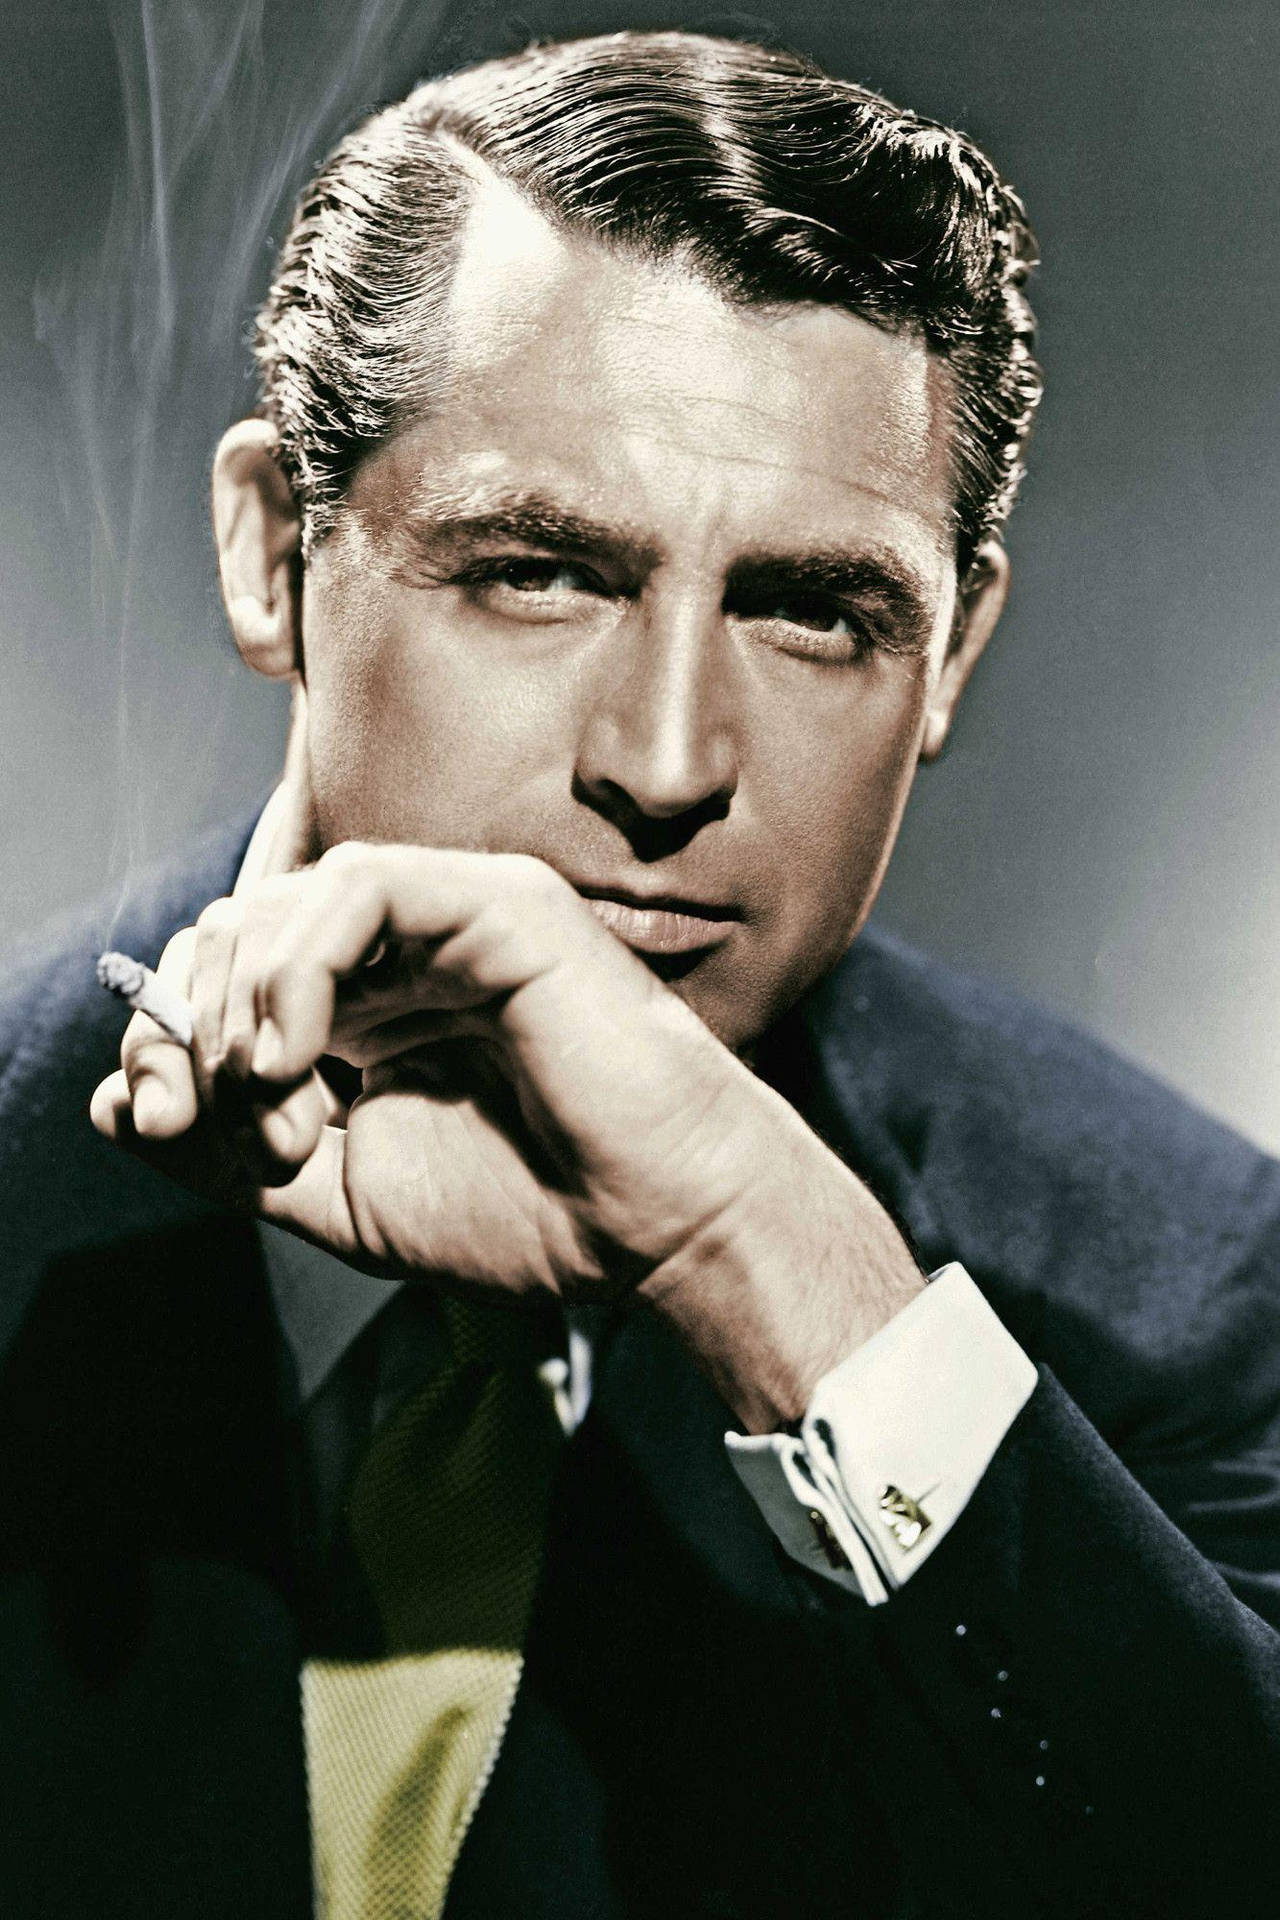 Classic Hollywood Star, Cary Grant, Captured in a Relaxed Moment Wallpaper